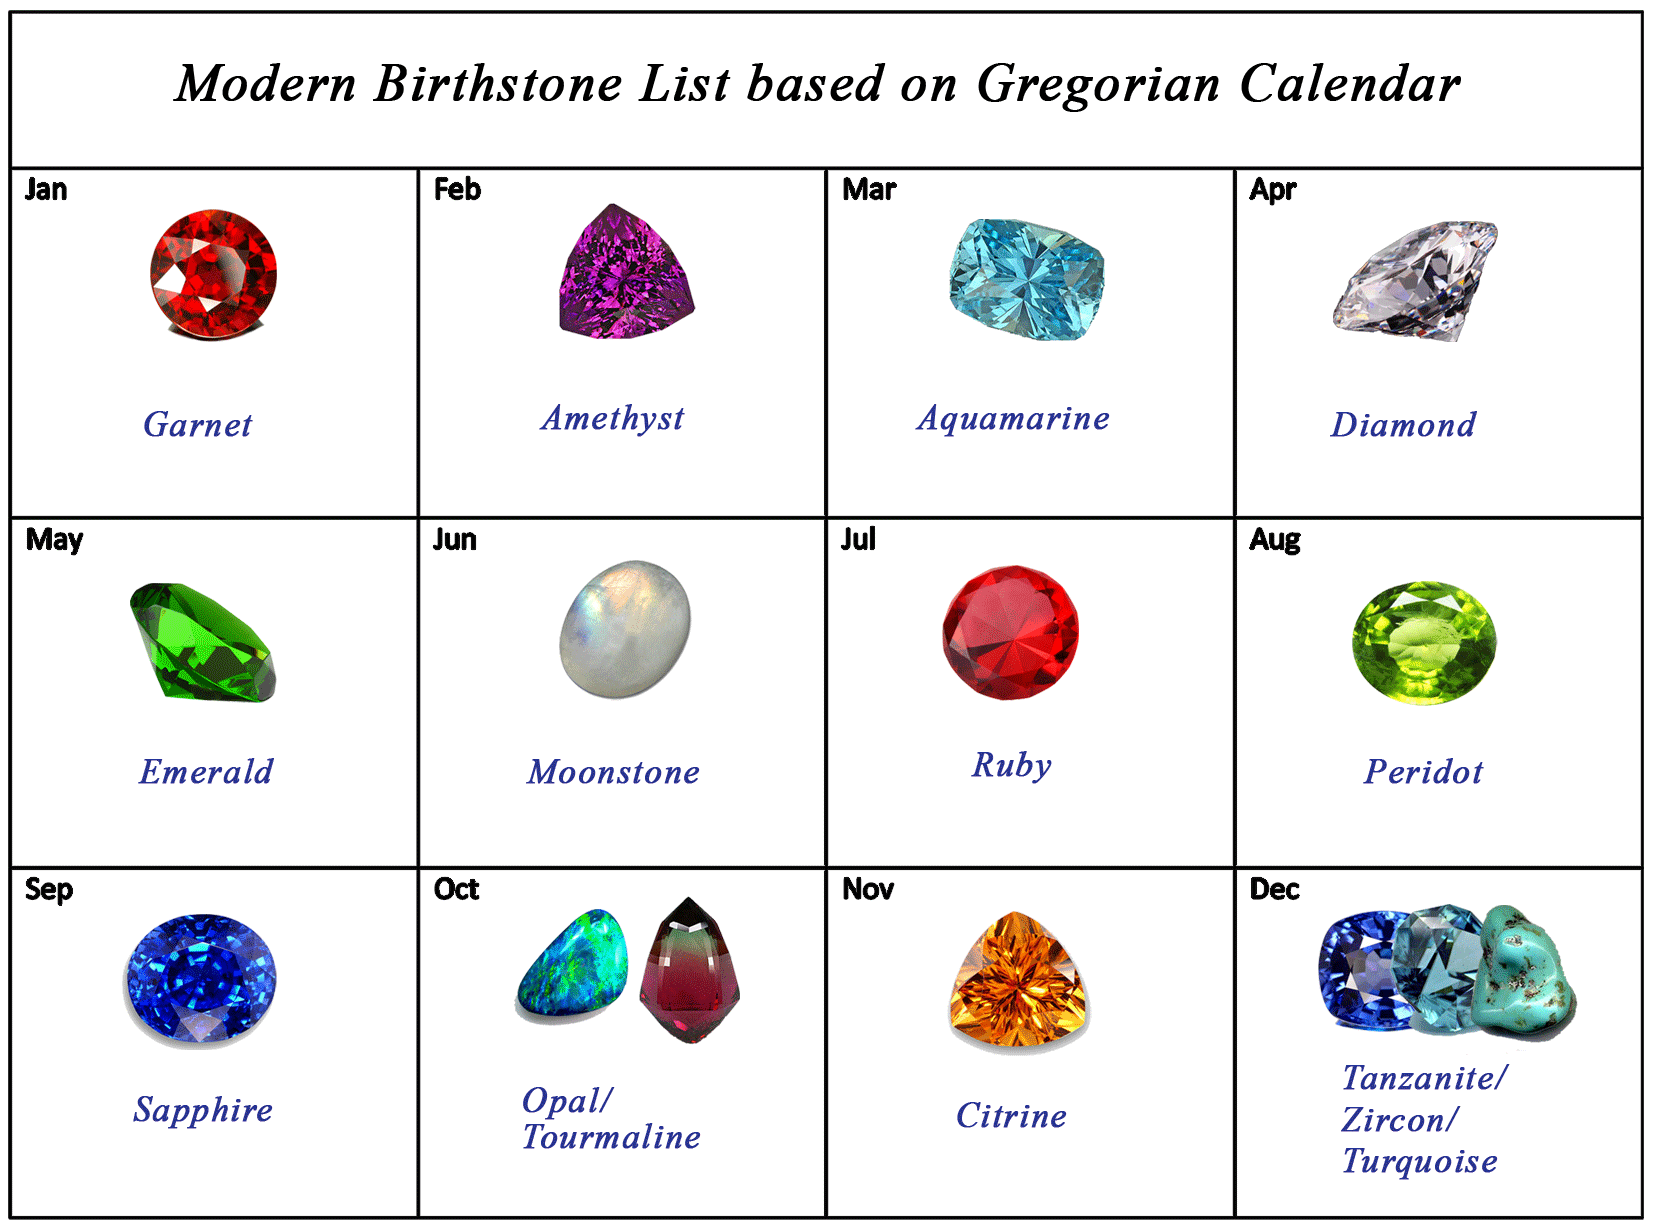 Birthstones - modern, you can also use- blood stone for March, pearl